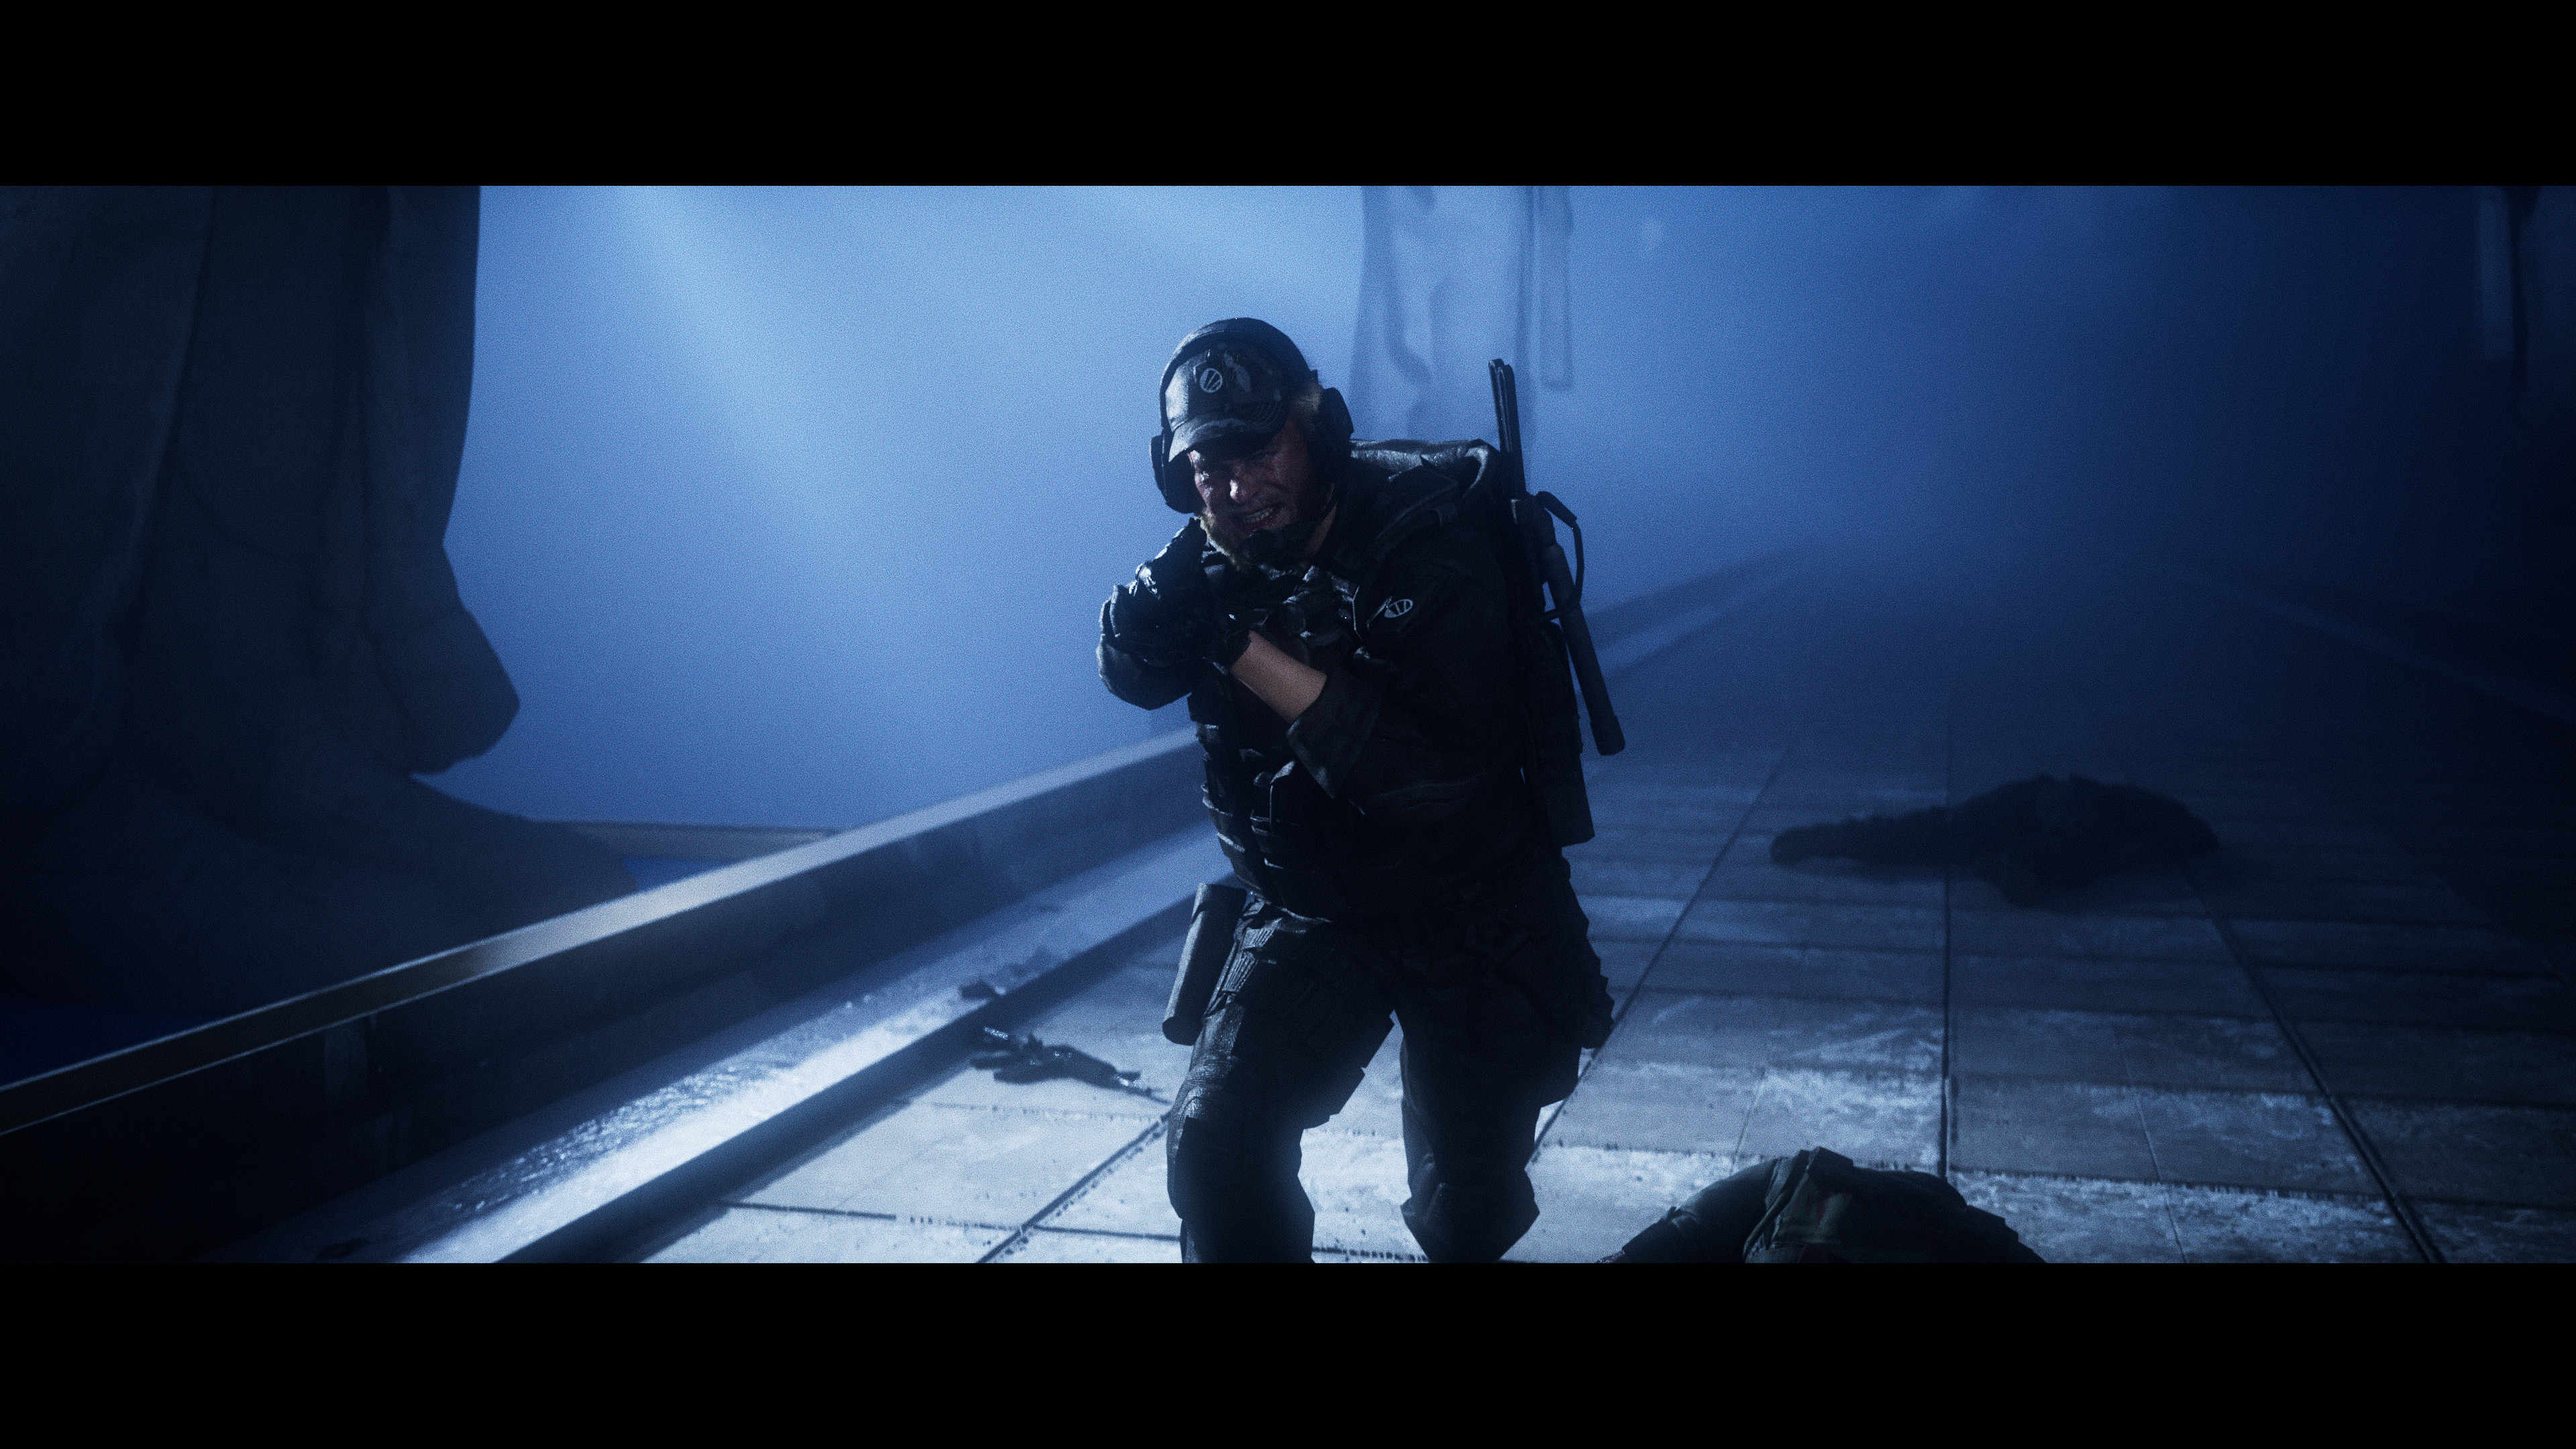 Some of the action cinematic lighting I did, total of 5 action shots were done under 6 hours given the deadline. Client also required path-tracing in UE, so I went with simpler setups here to save time. Pre-color grading and VFX